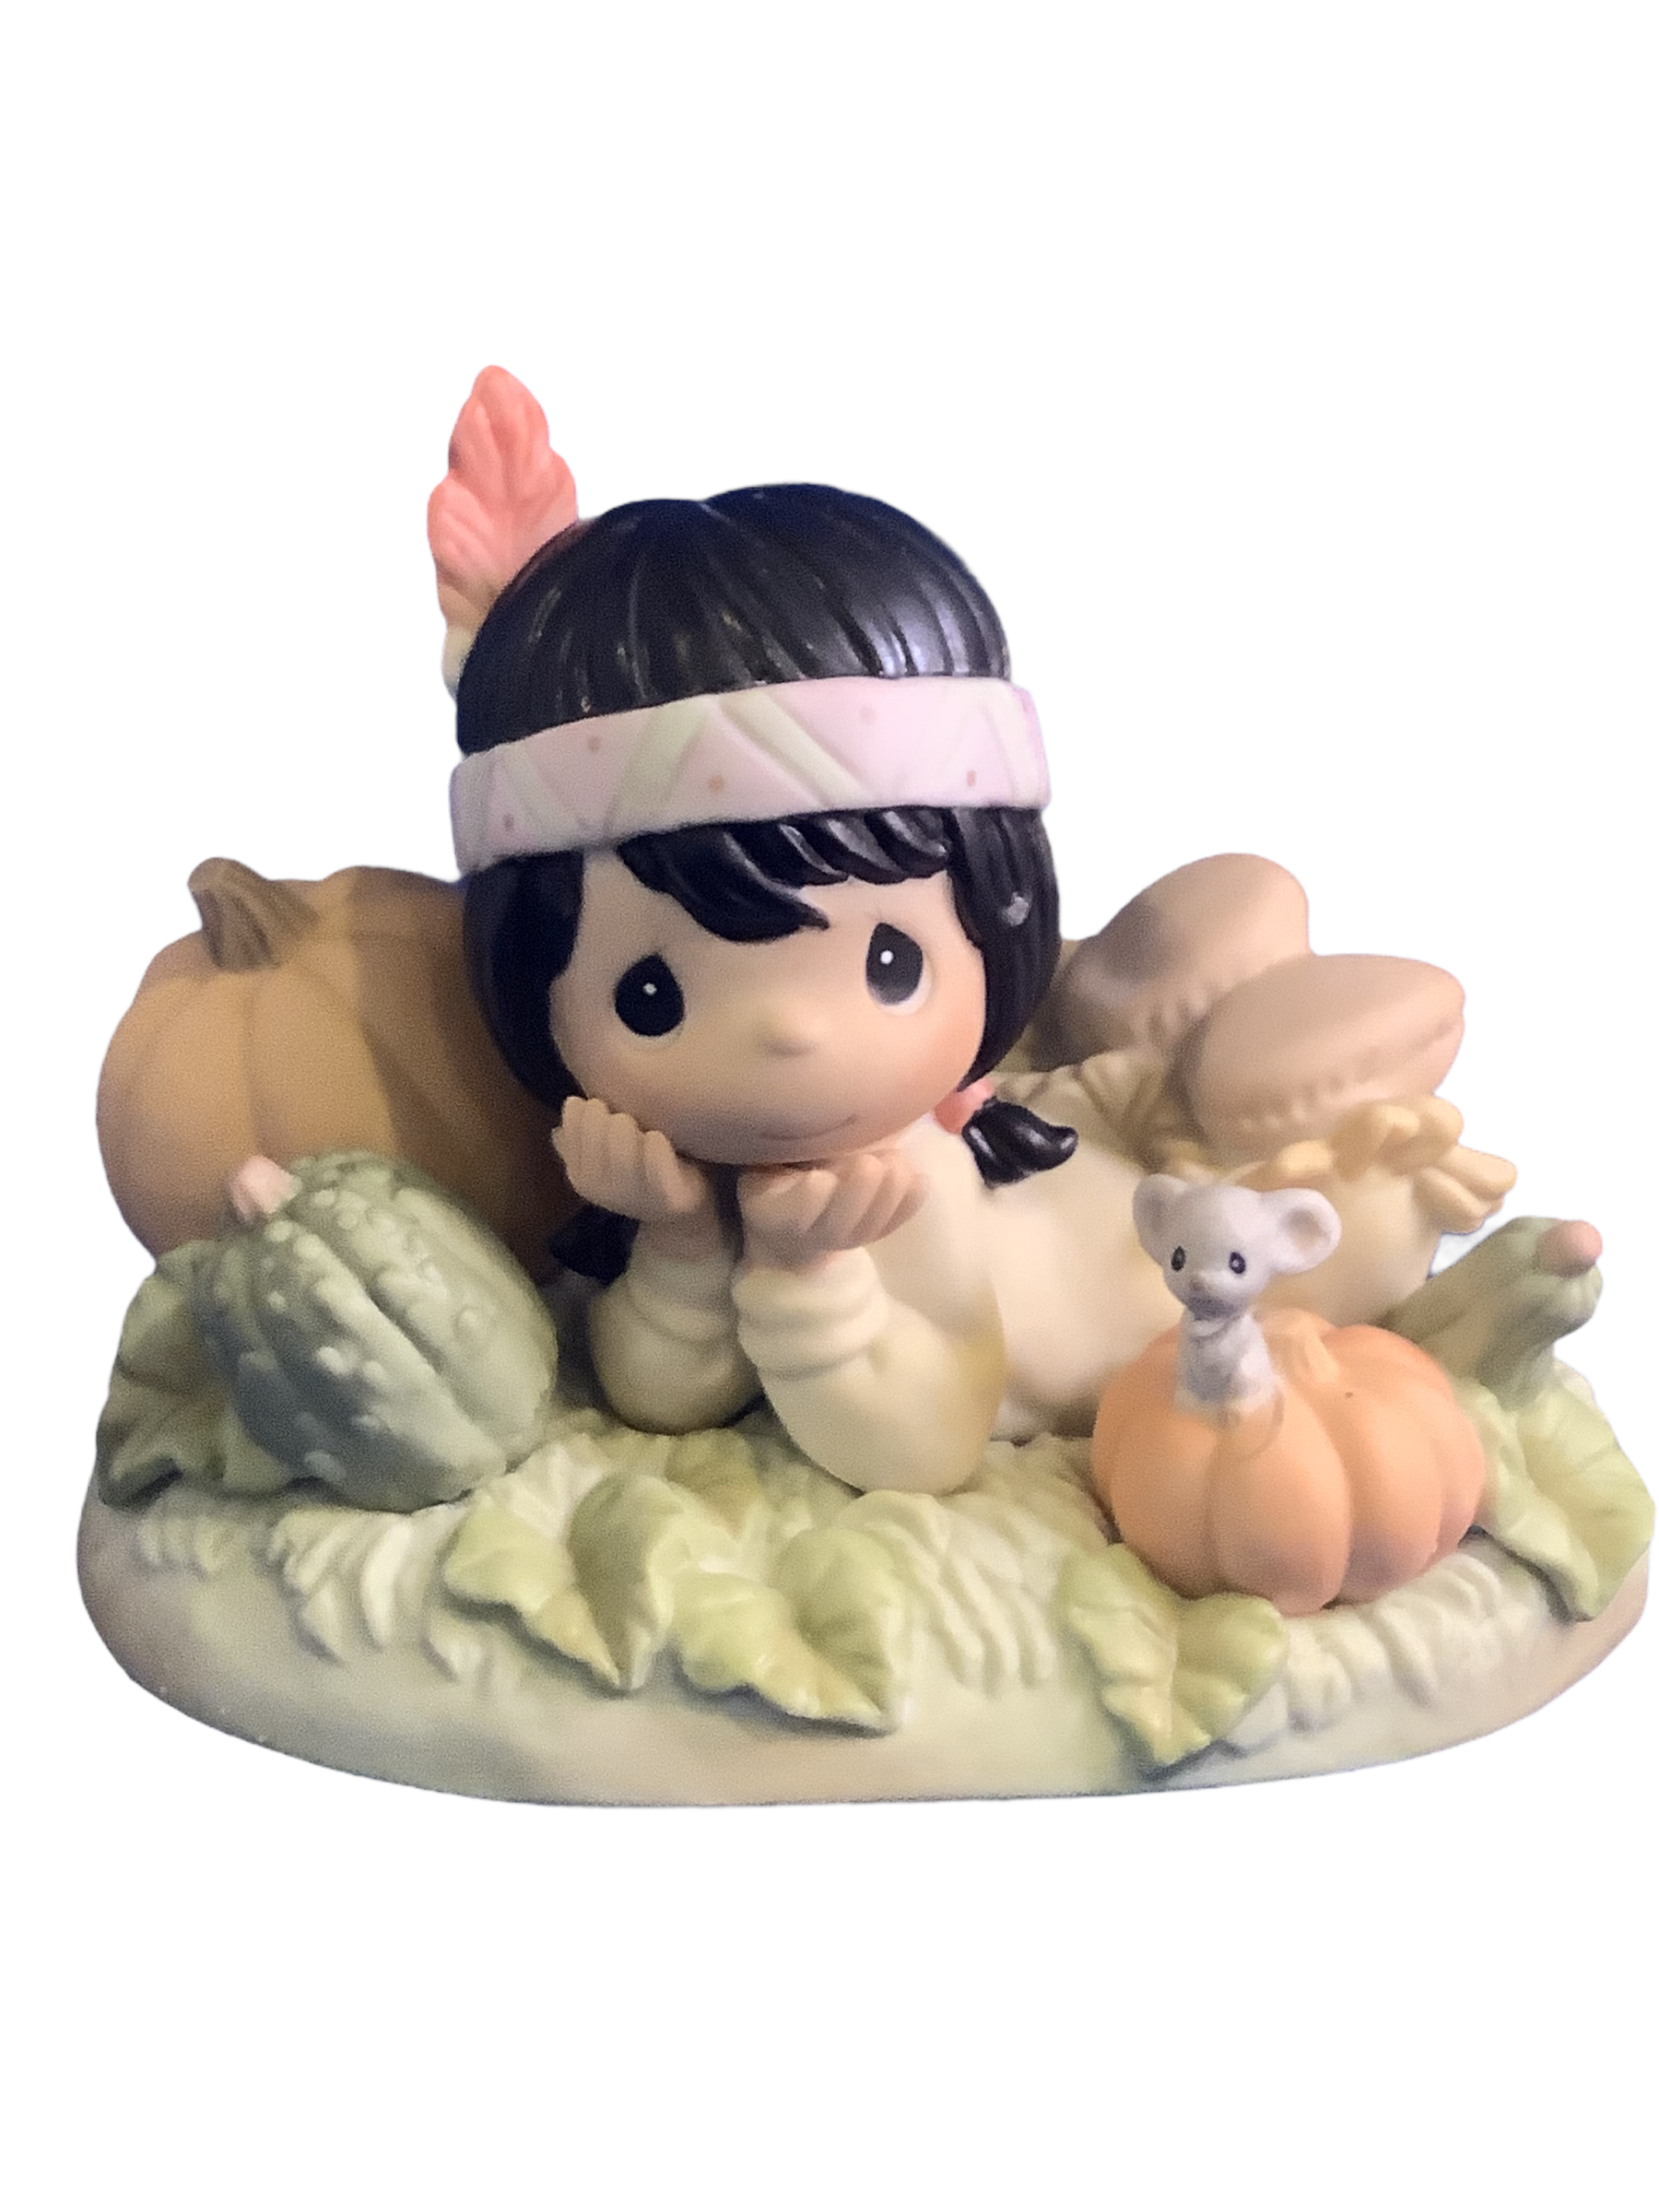 Squashed With Love - Precious Moment Figurine